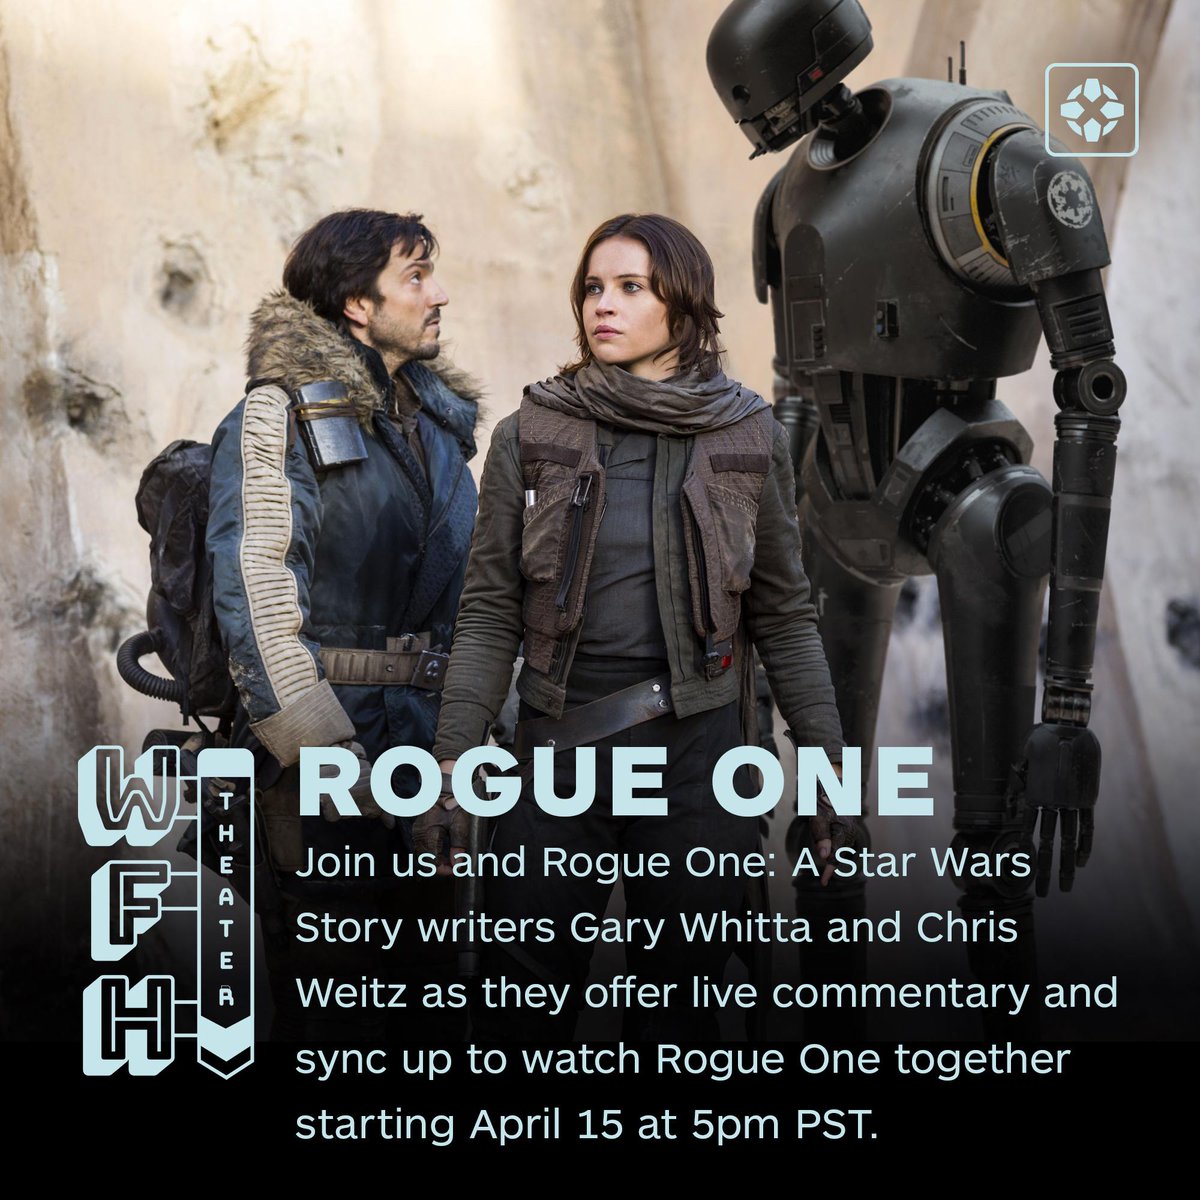 We've live now with  #RogueOne writers  @garywhitta and  @chrisweitz and IGN hosts  @clintgage and  @MaxScoville. Join the conversation here and get ready to sync up!  #WFHTheater  https://bit.ly/34GOIYE 